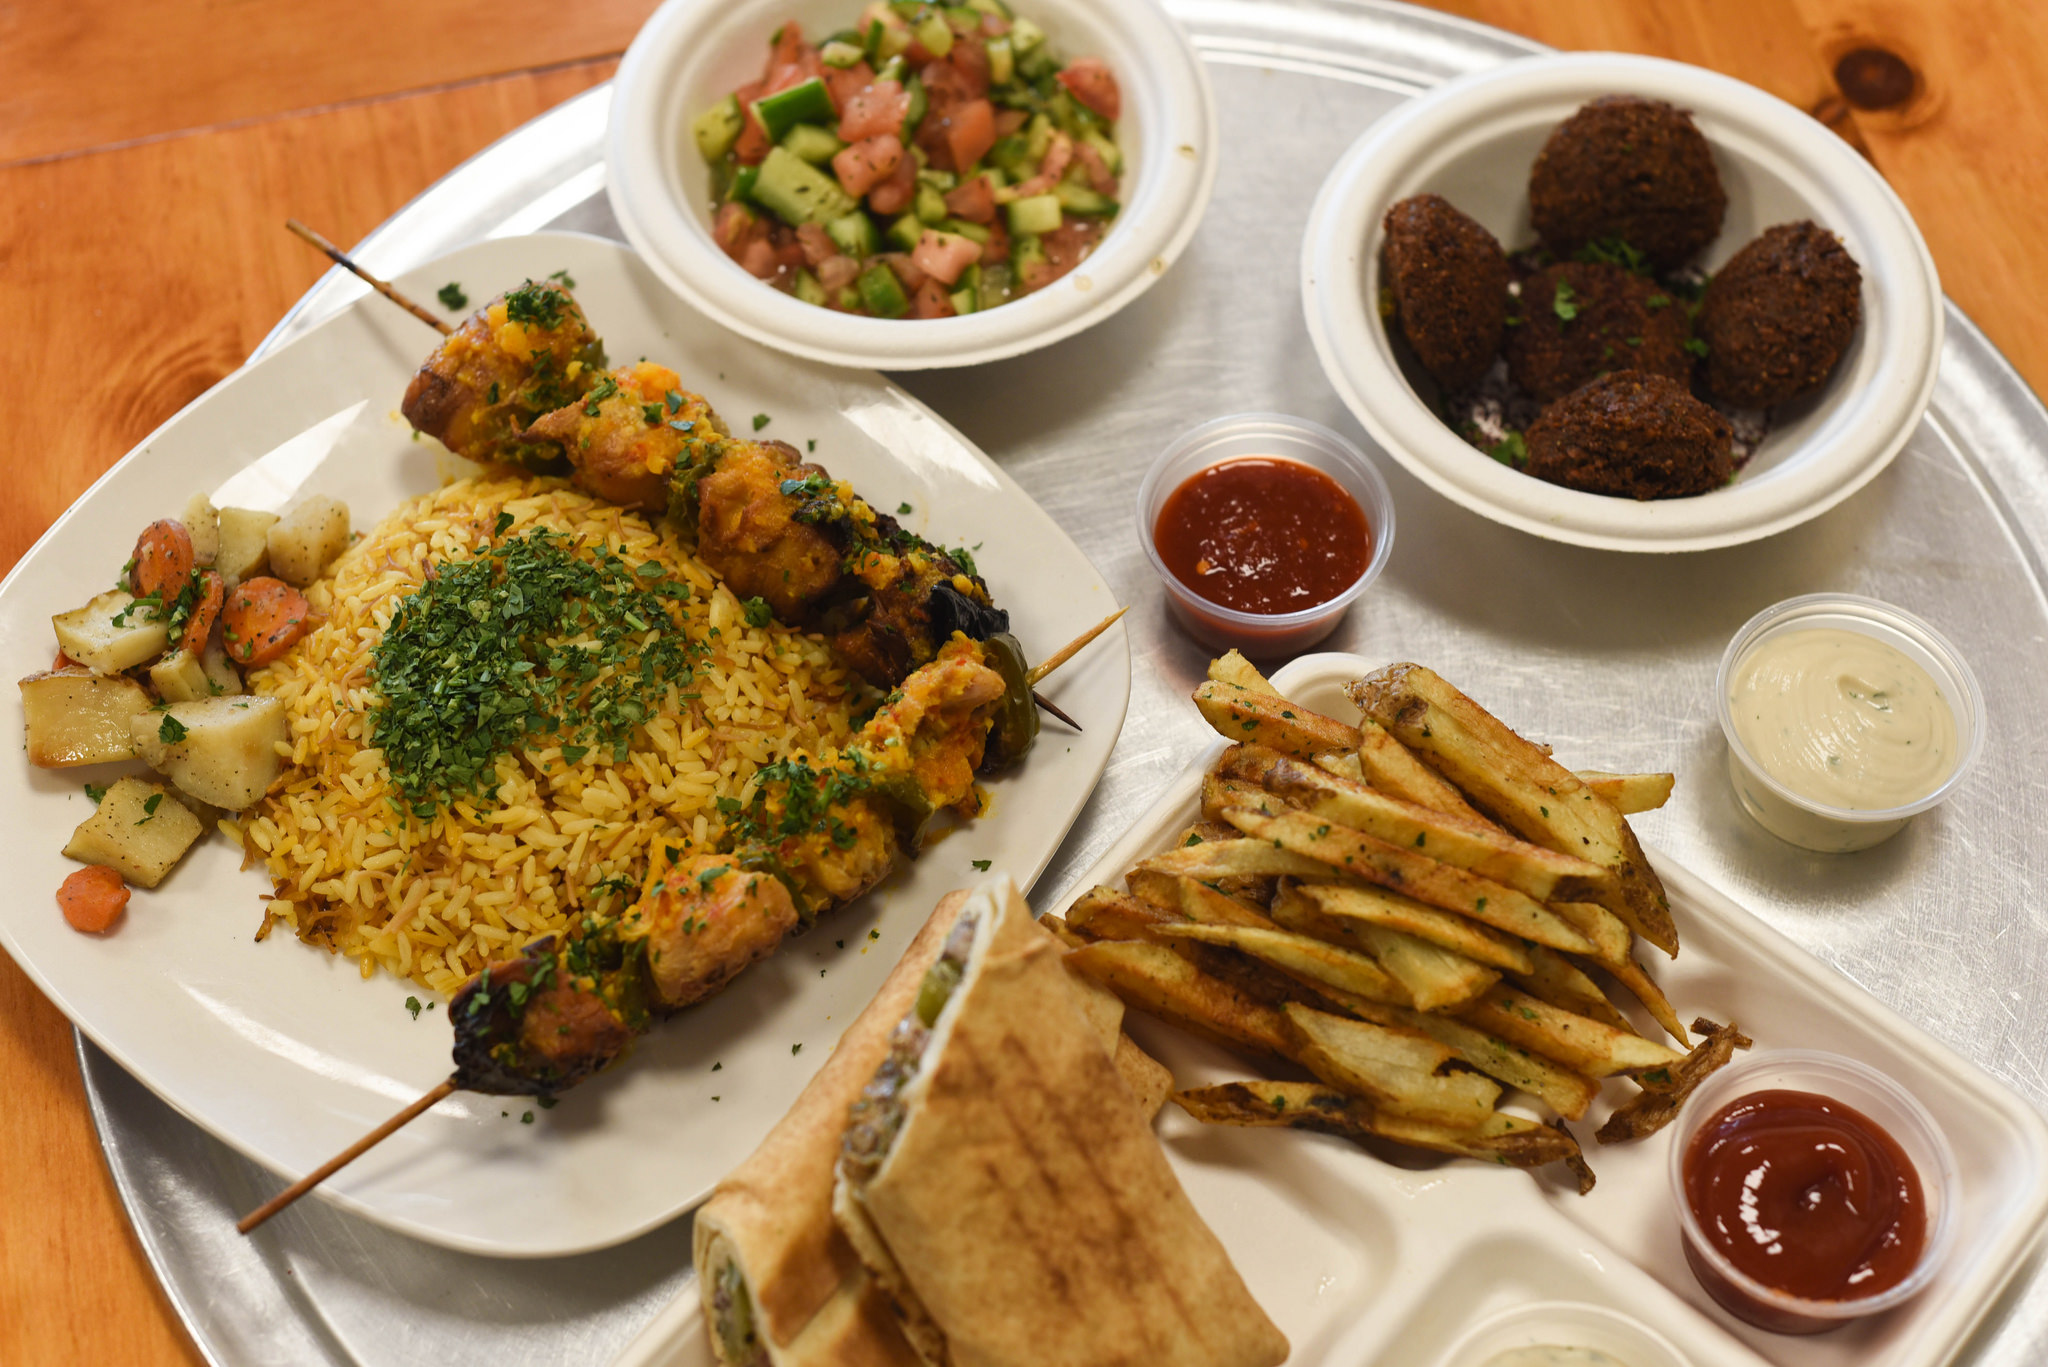 A spread of food on a tray, including kebabs, falafel, and other Middle Eastern foods served at Bisho's Cafe & Bakery.